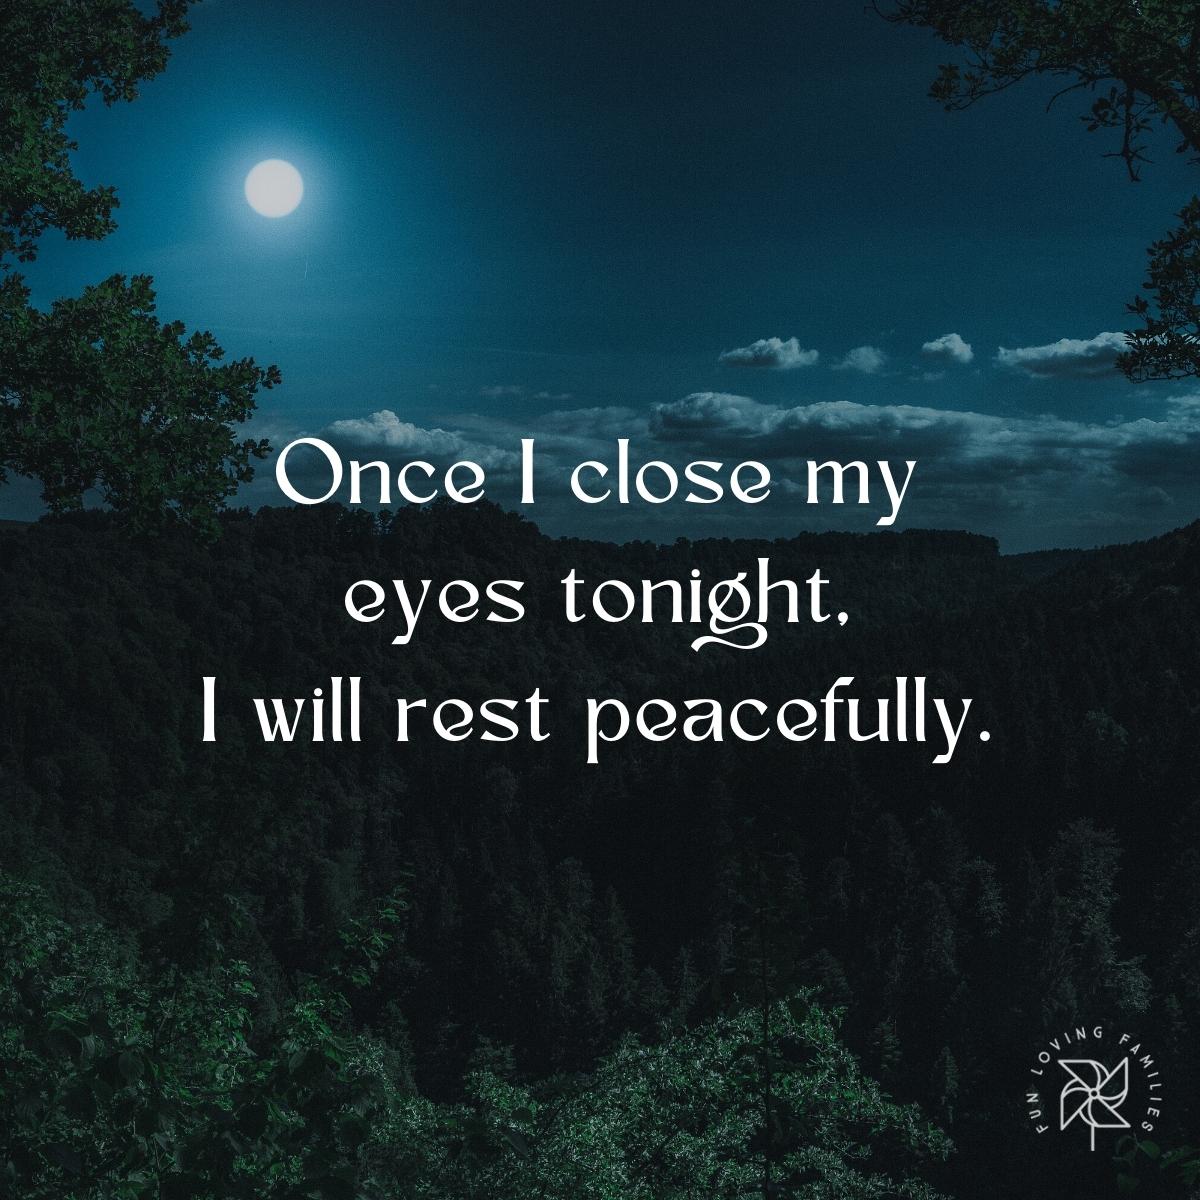 Once I close my eyes tonight, I will rest peacefully affirmation